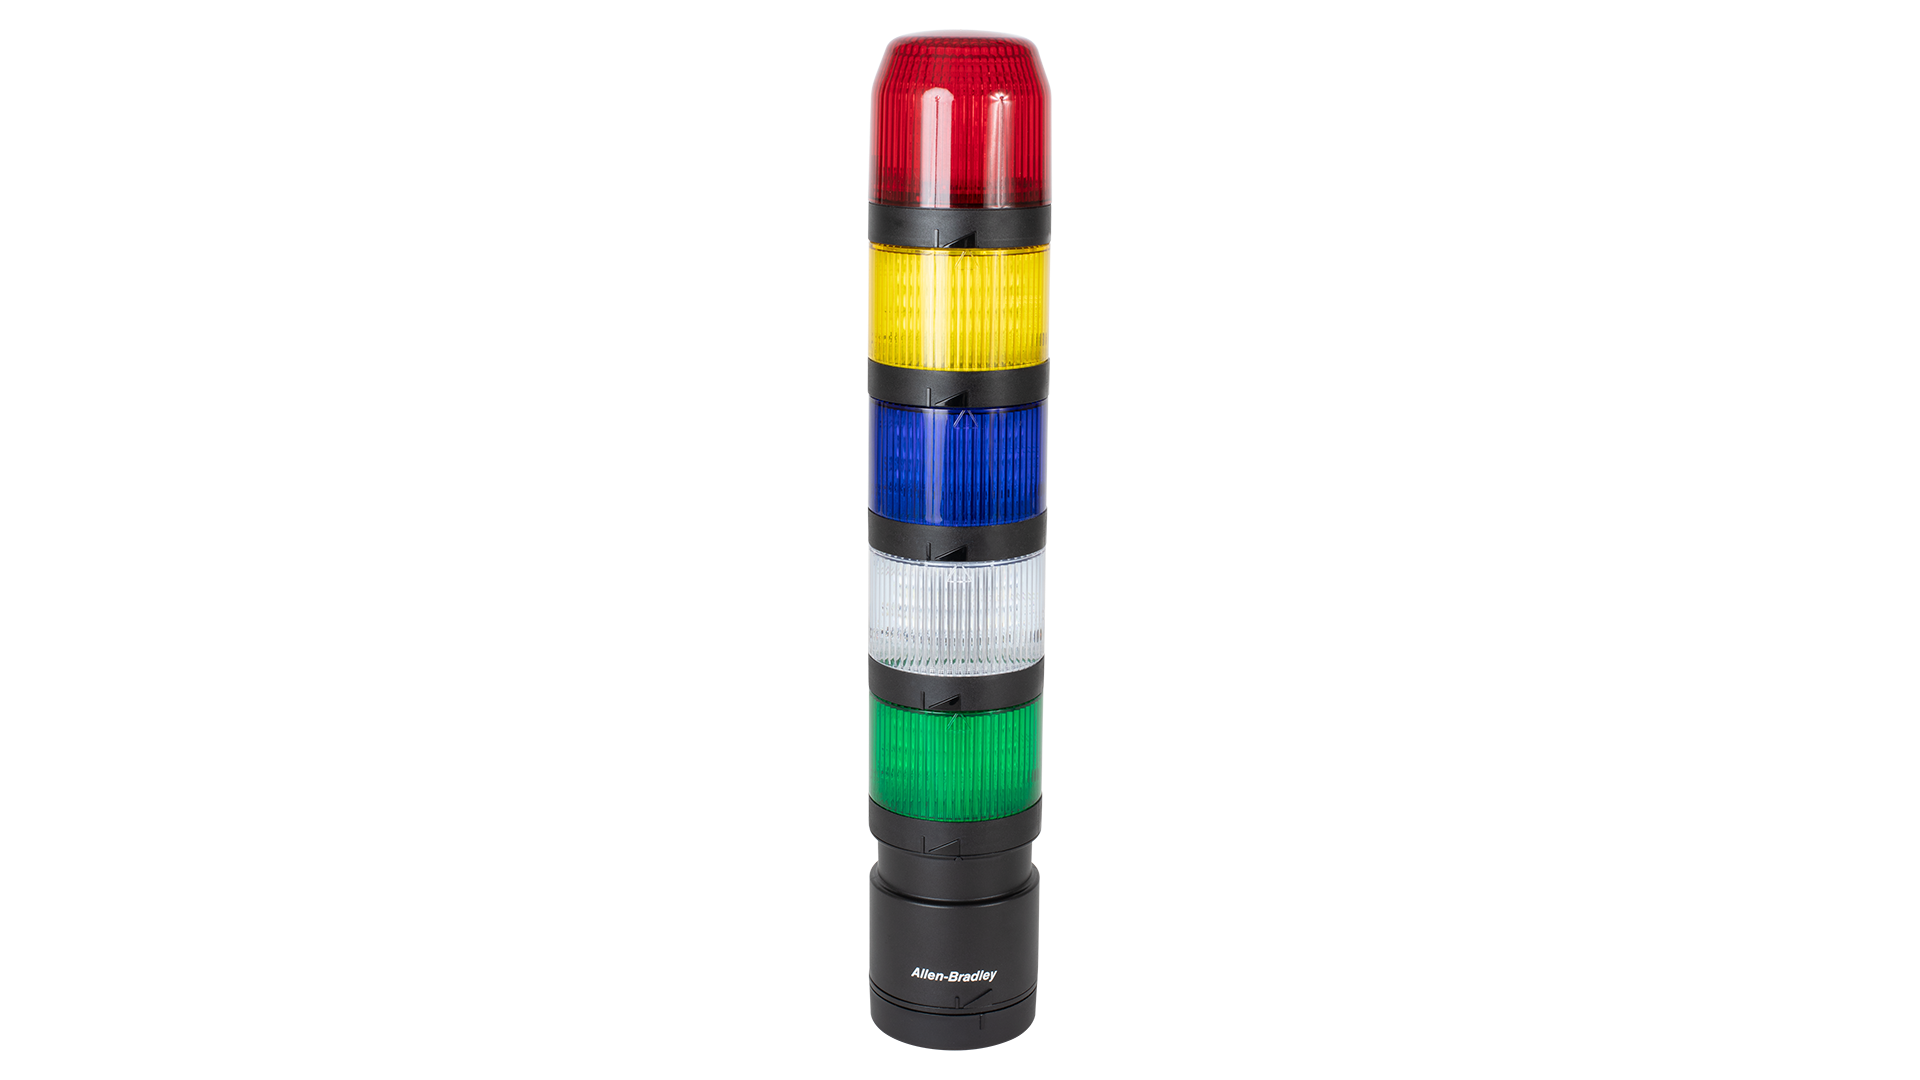 IO-Link stack light from top to bottom - black transducer sounder module, red, amber, and green unlit light modules, black vertical mount base